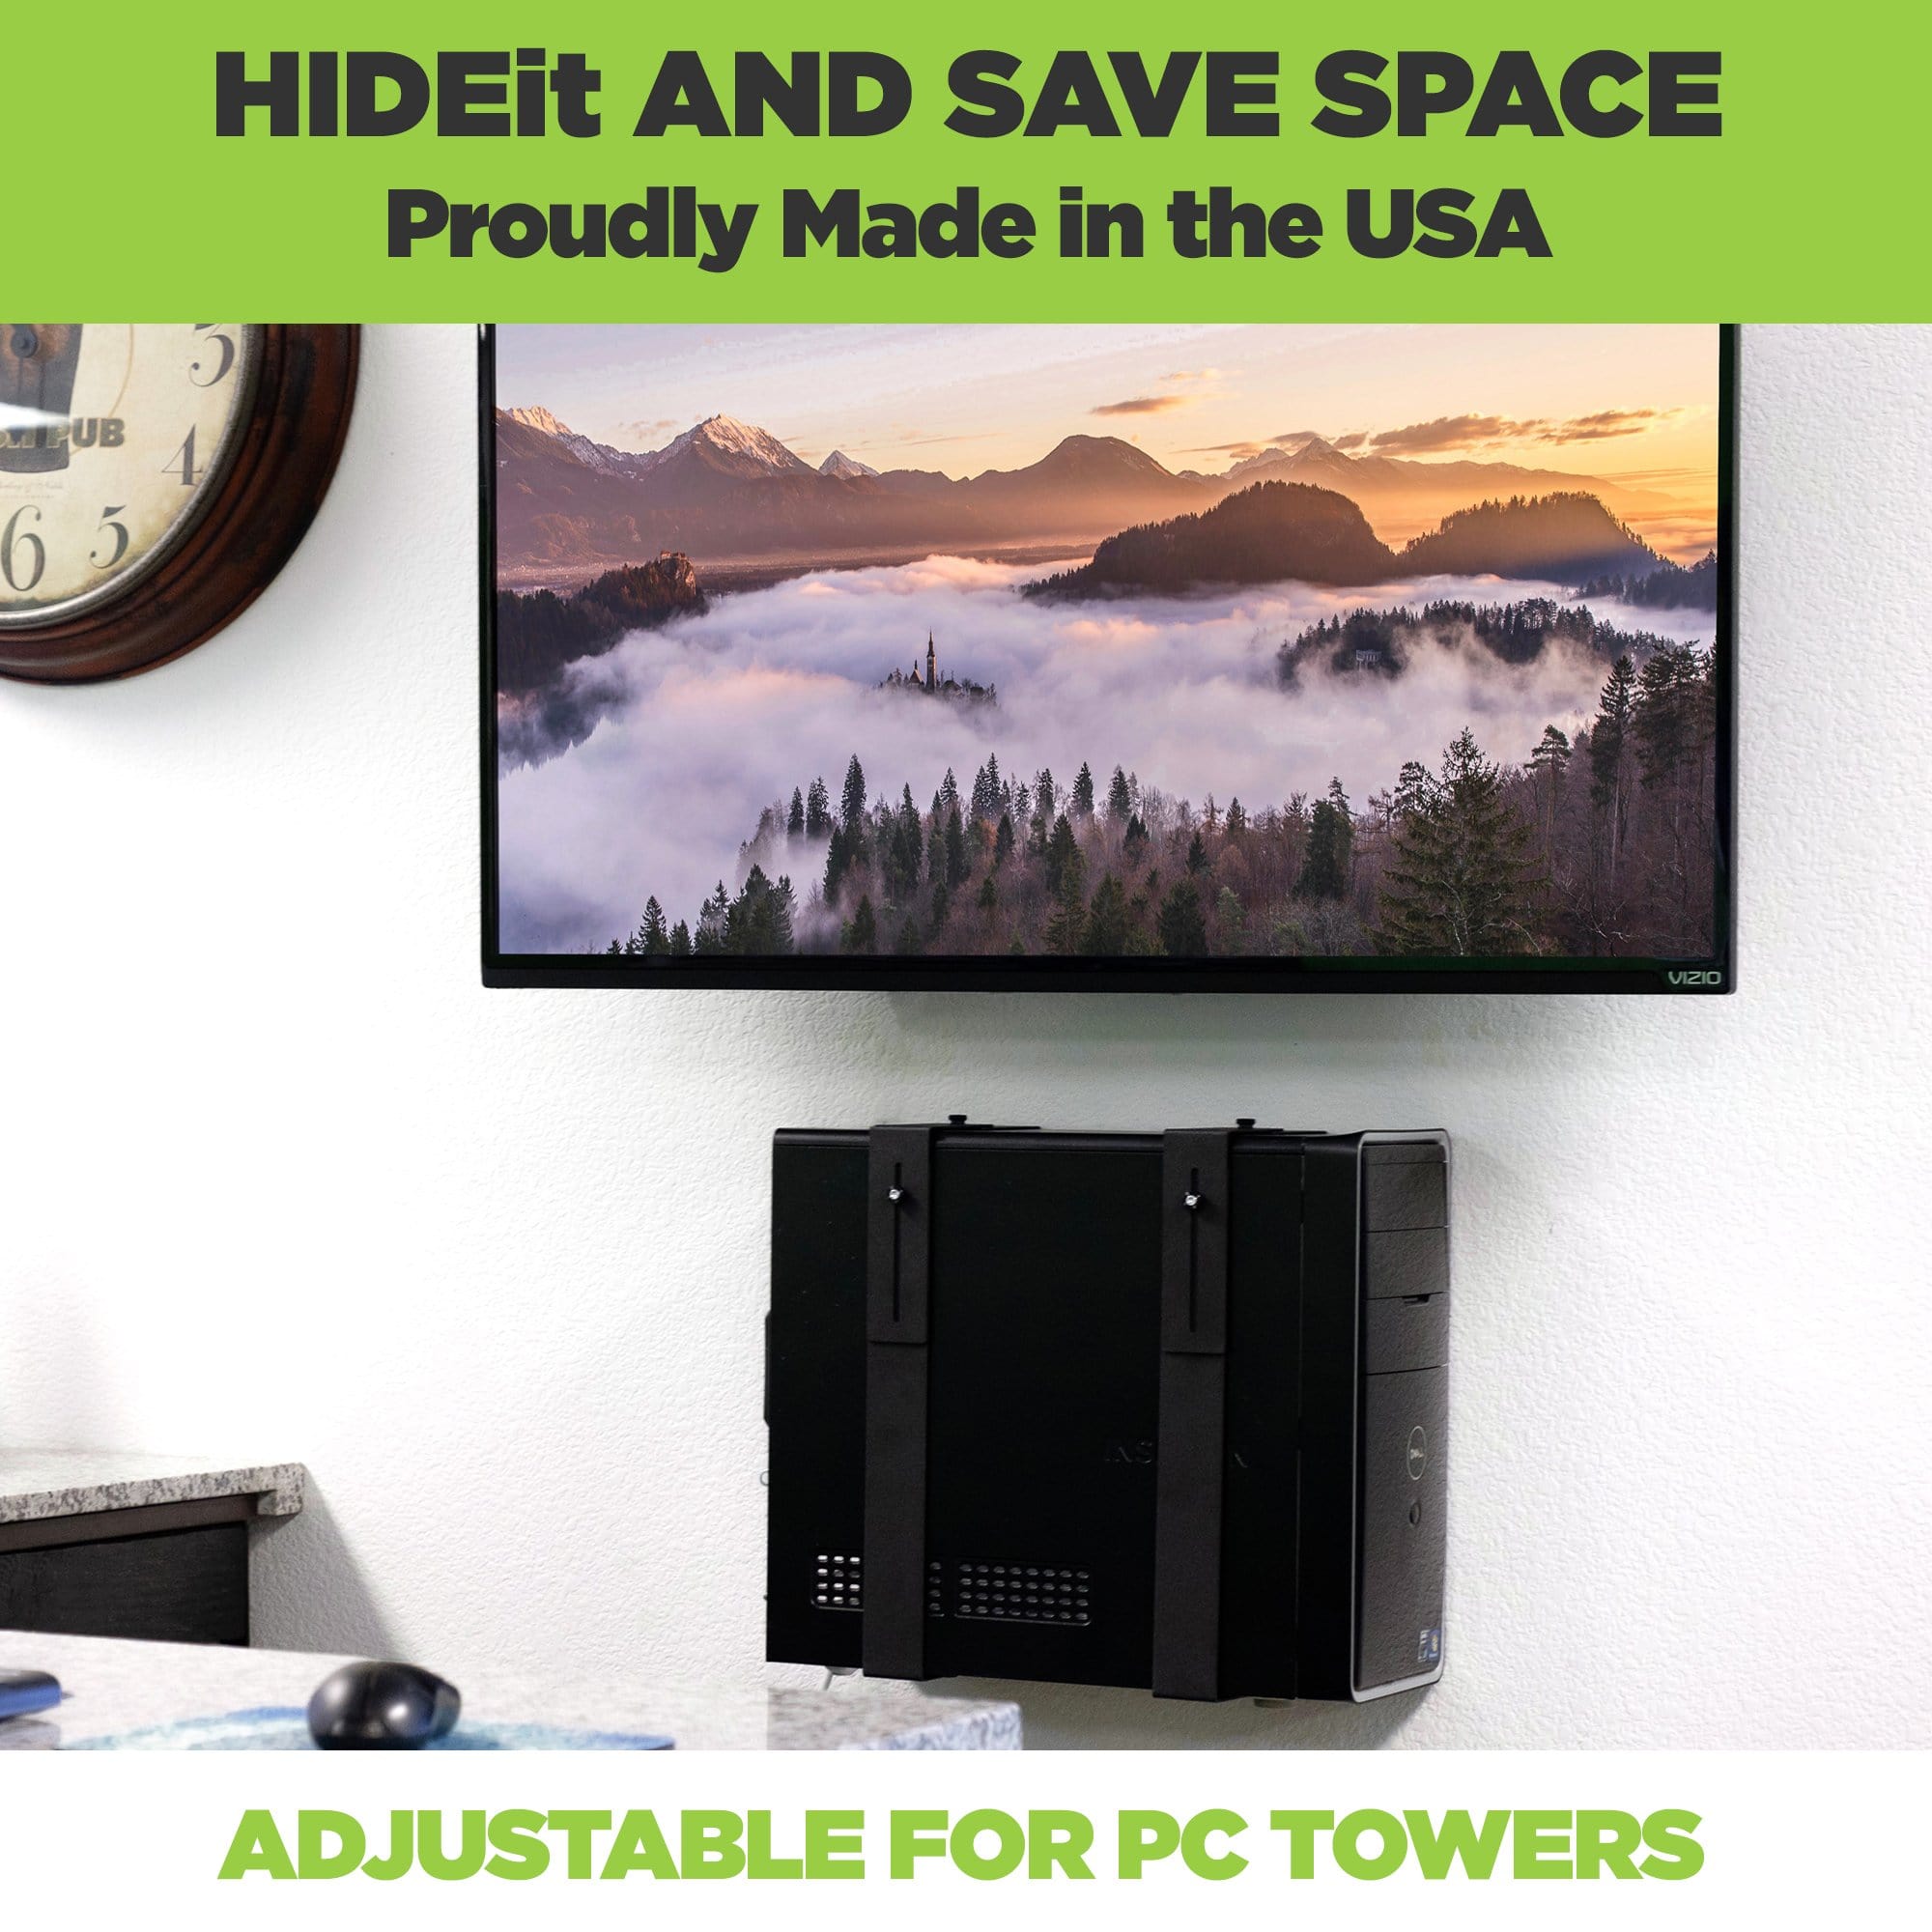 PC mounted on the wall in a HIDEit Mount beneath the wall mounted TV.